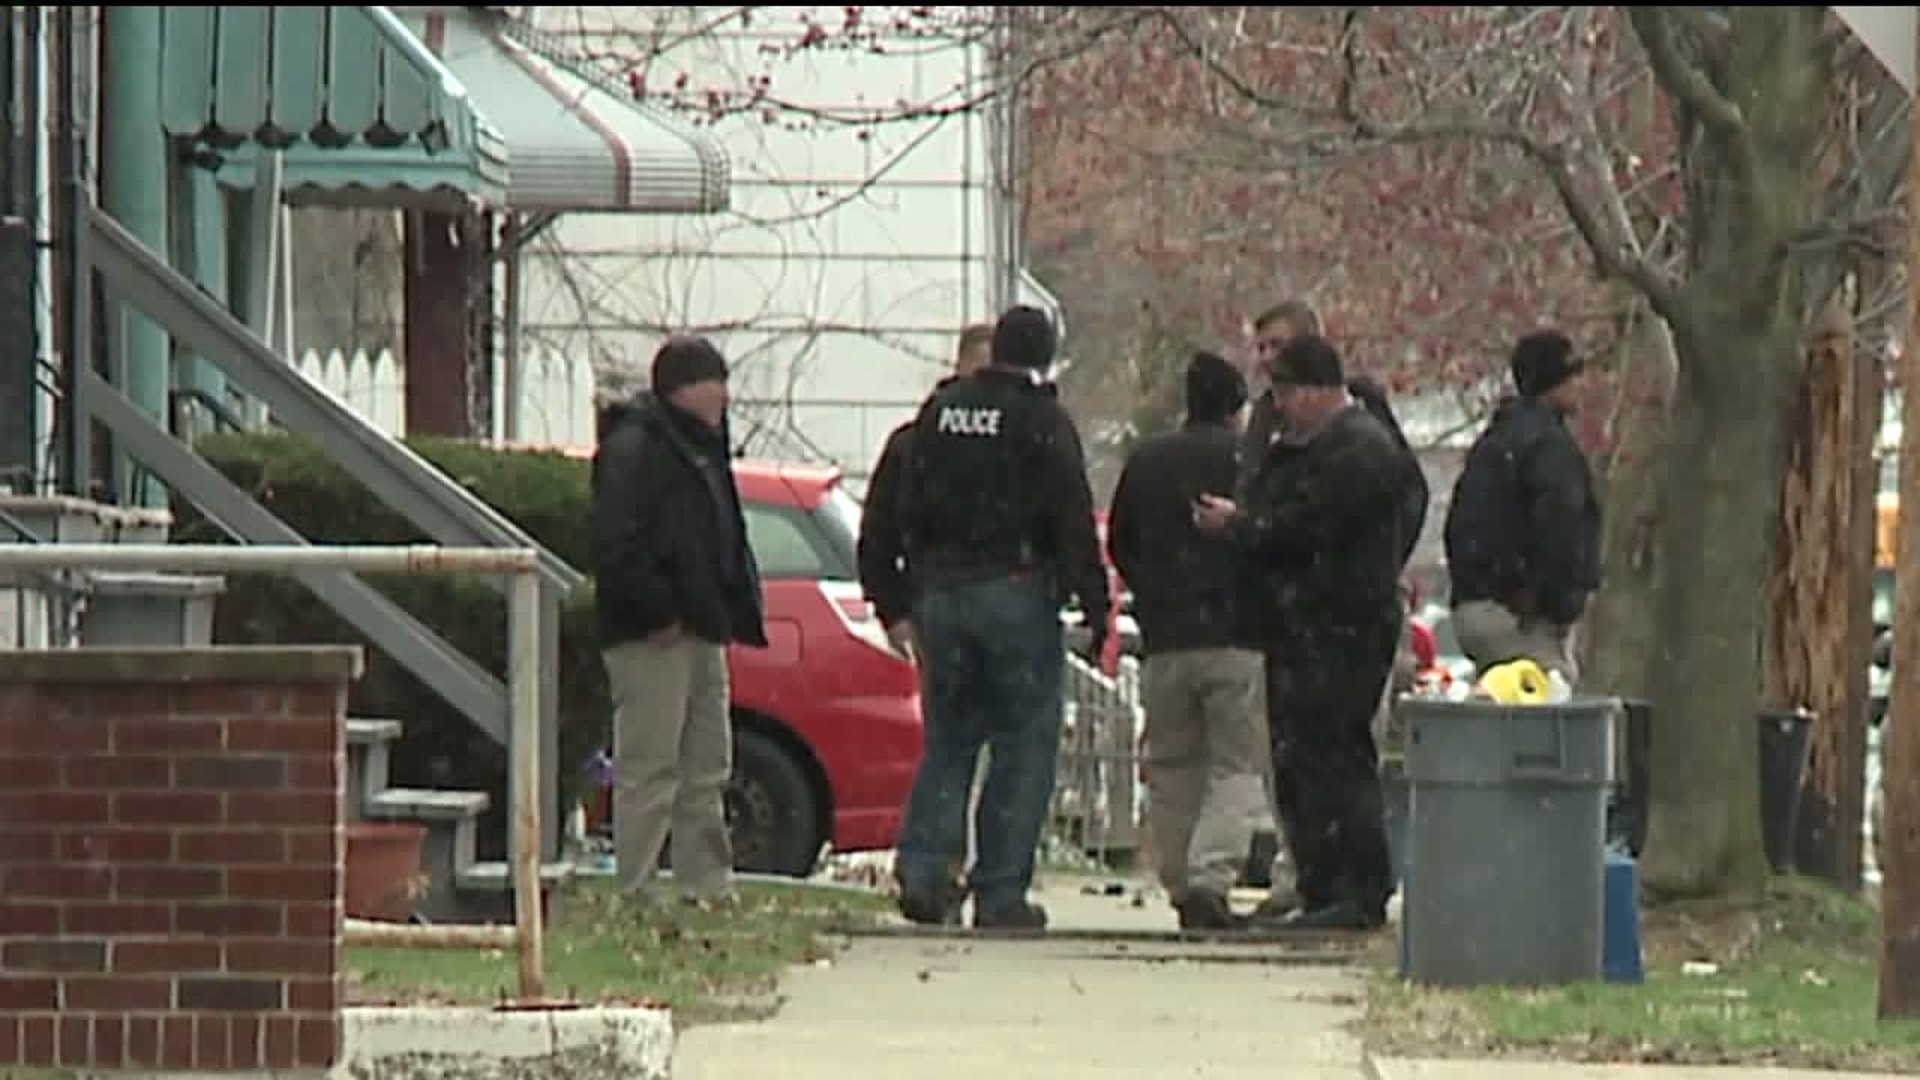 Search Continues for Gunman in Wilkes-Barre